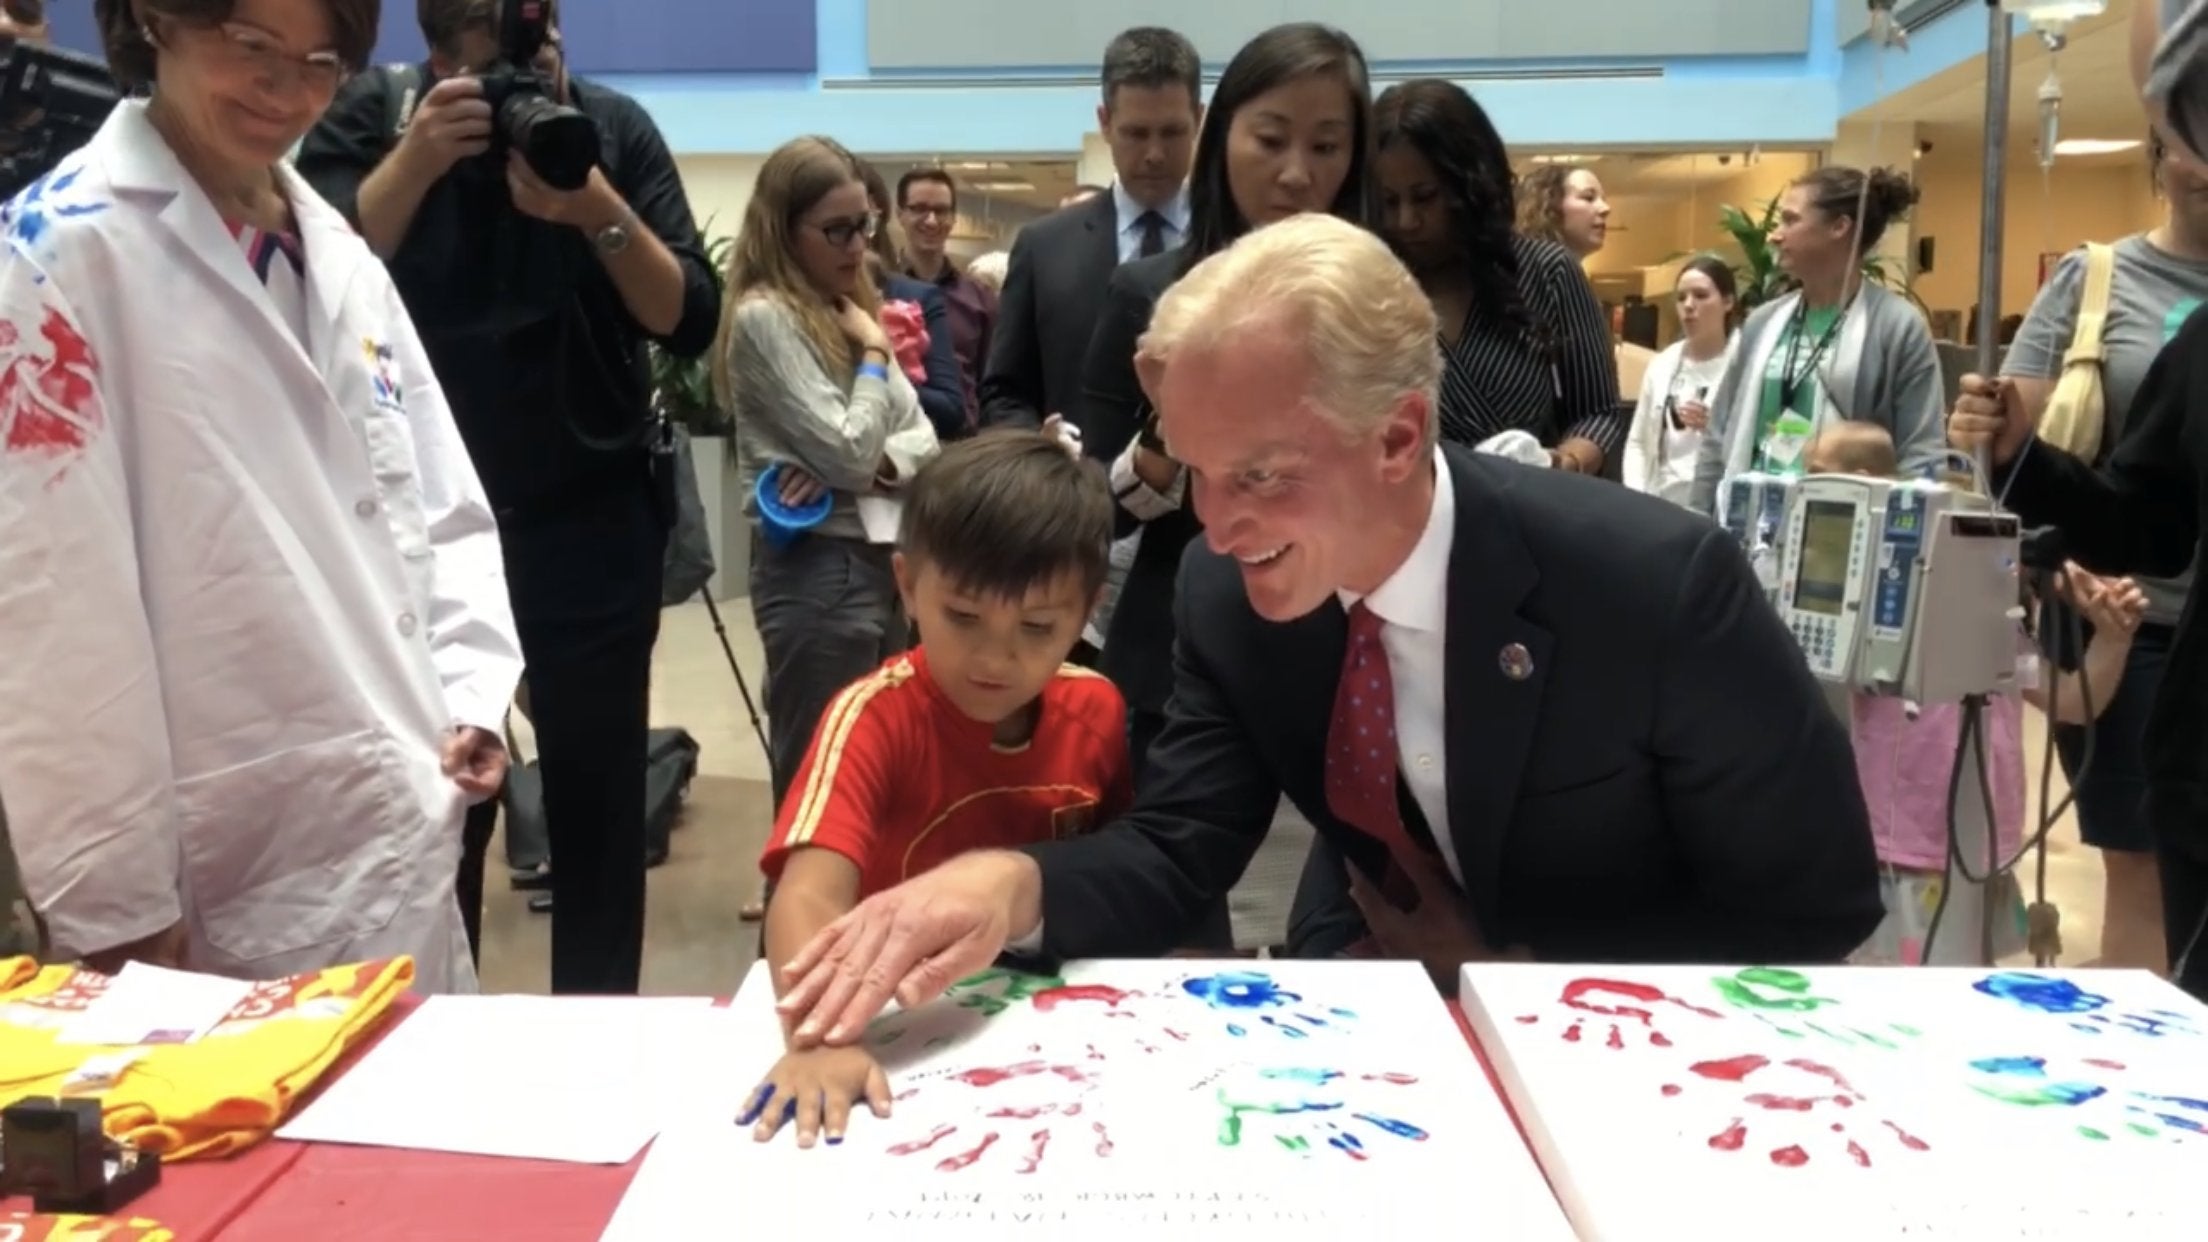 Kevin Reilly helps a child make handprint with paint.